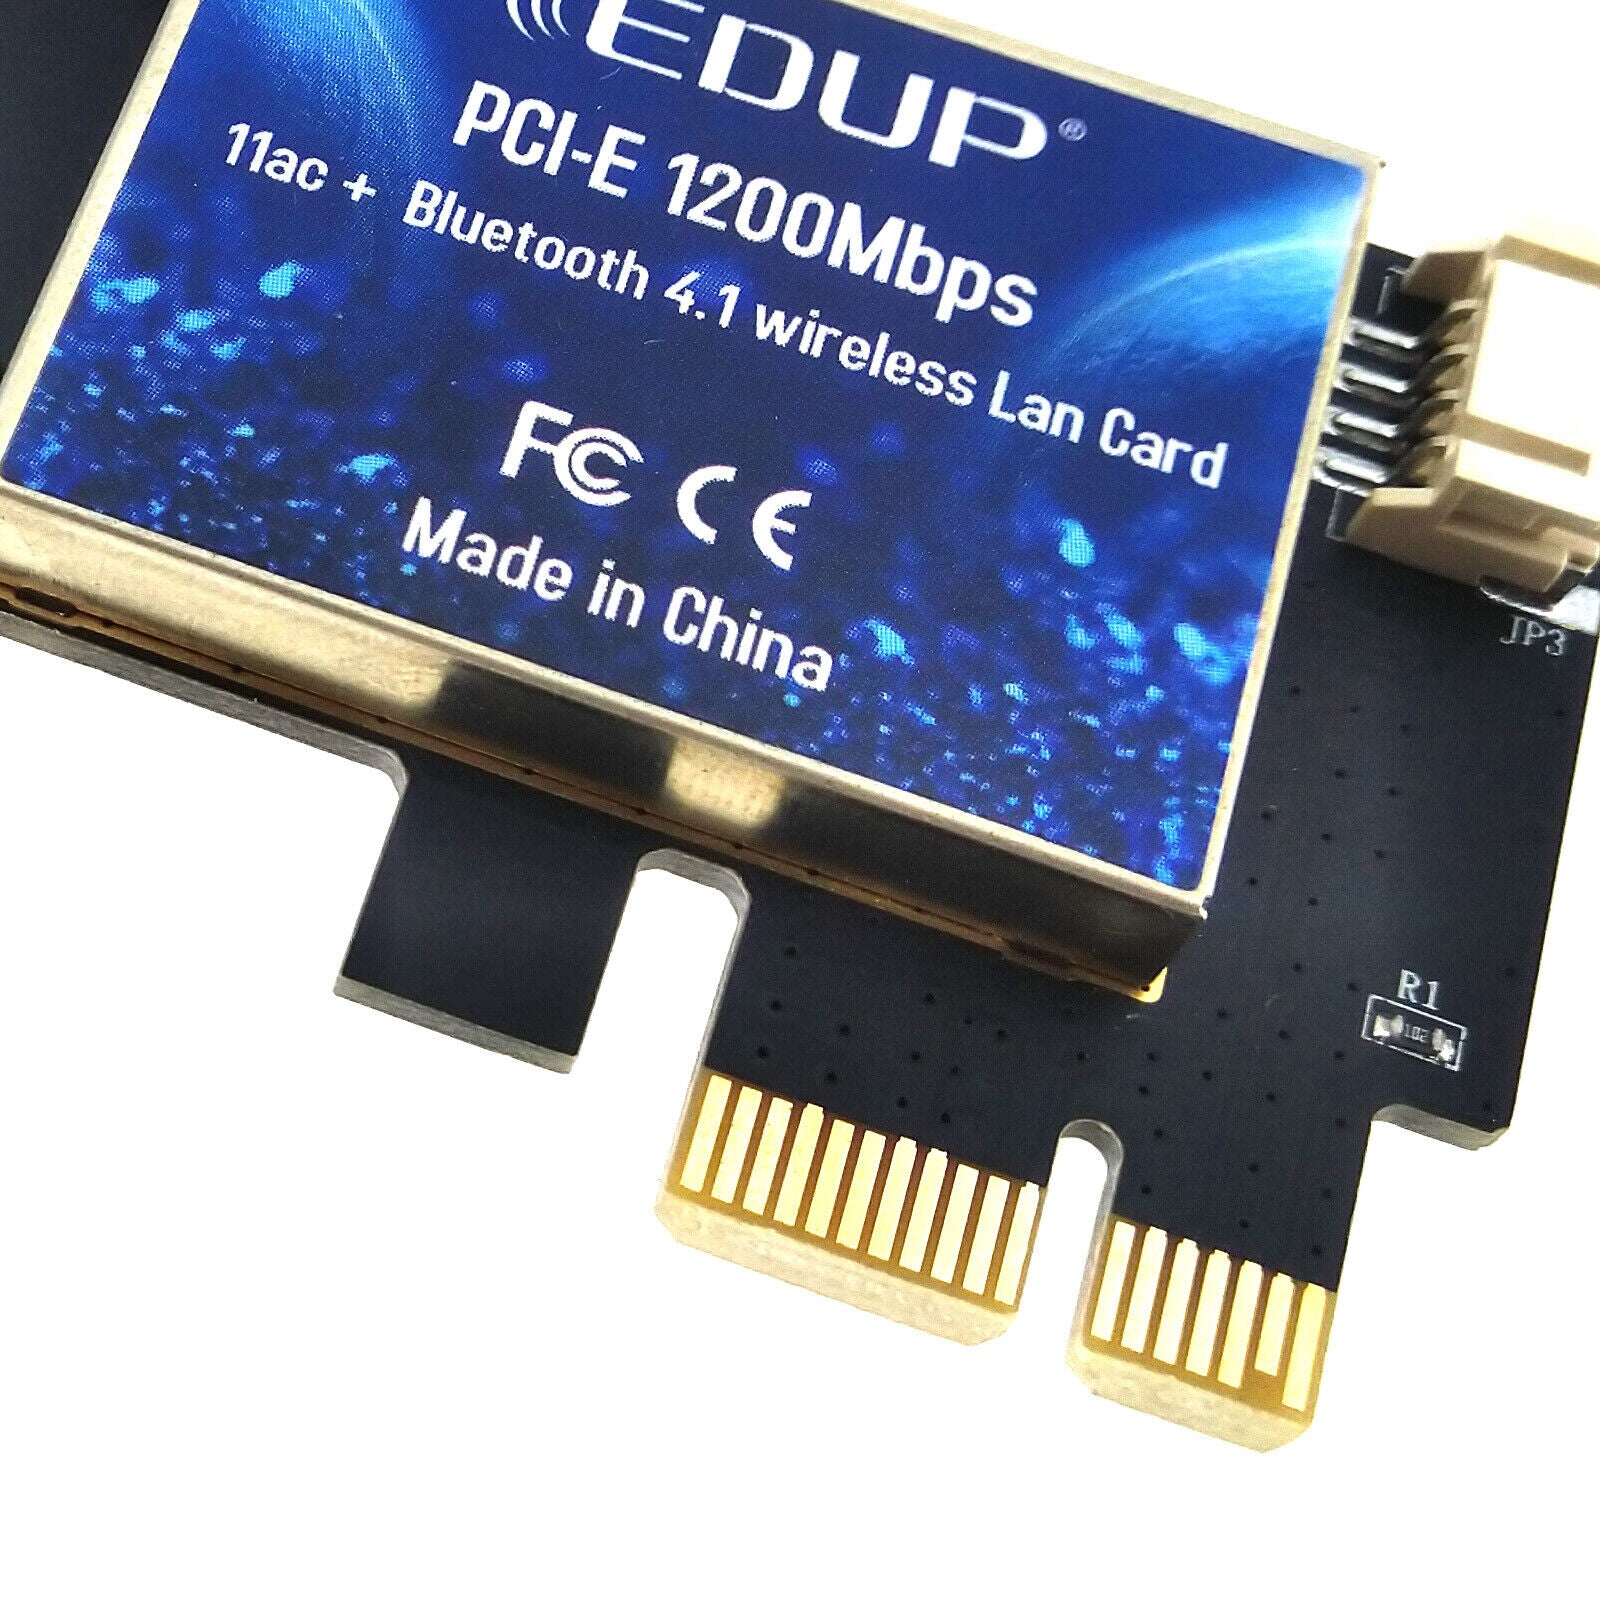 PCIe Wireless Adapter Dual Band AC 1200Mbps Card EDUP EP-9620 for WiFi Bluetooth